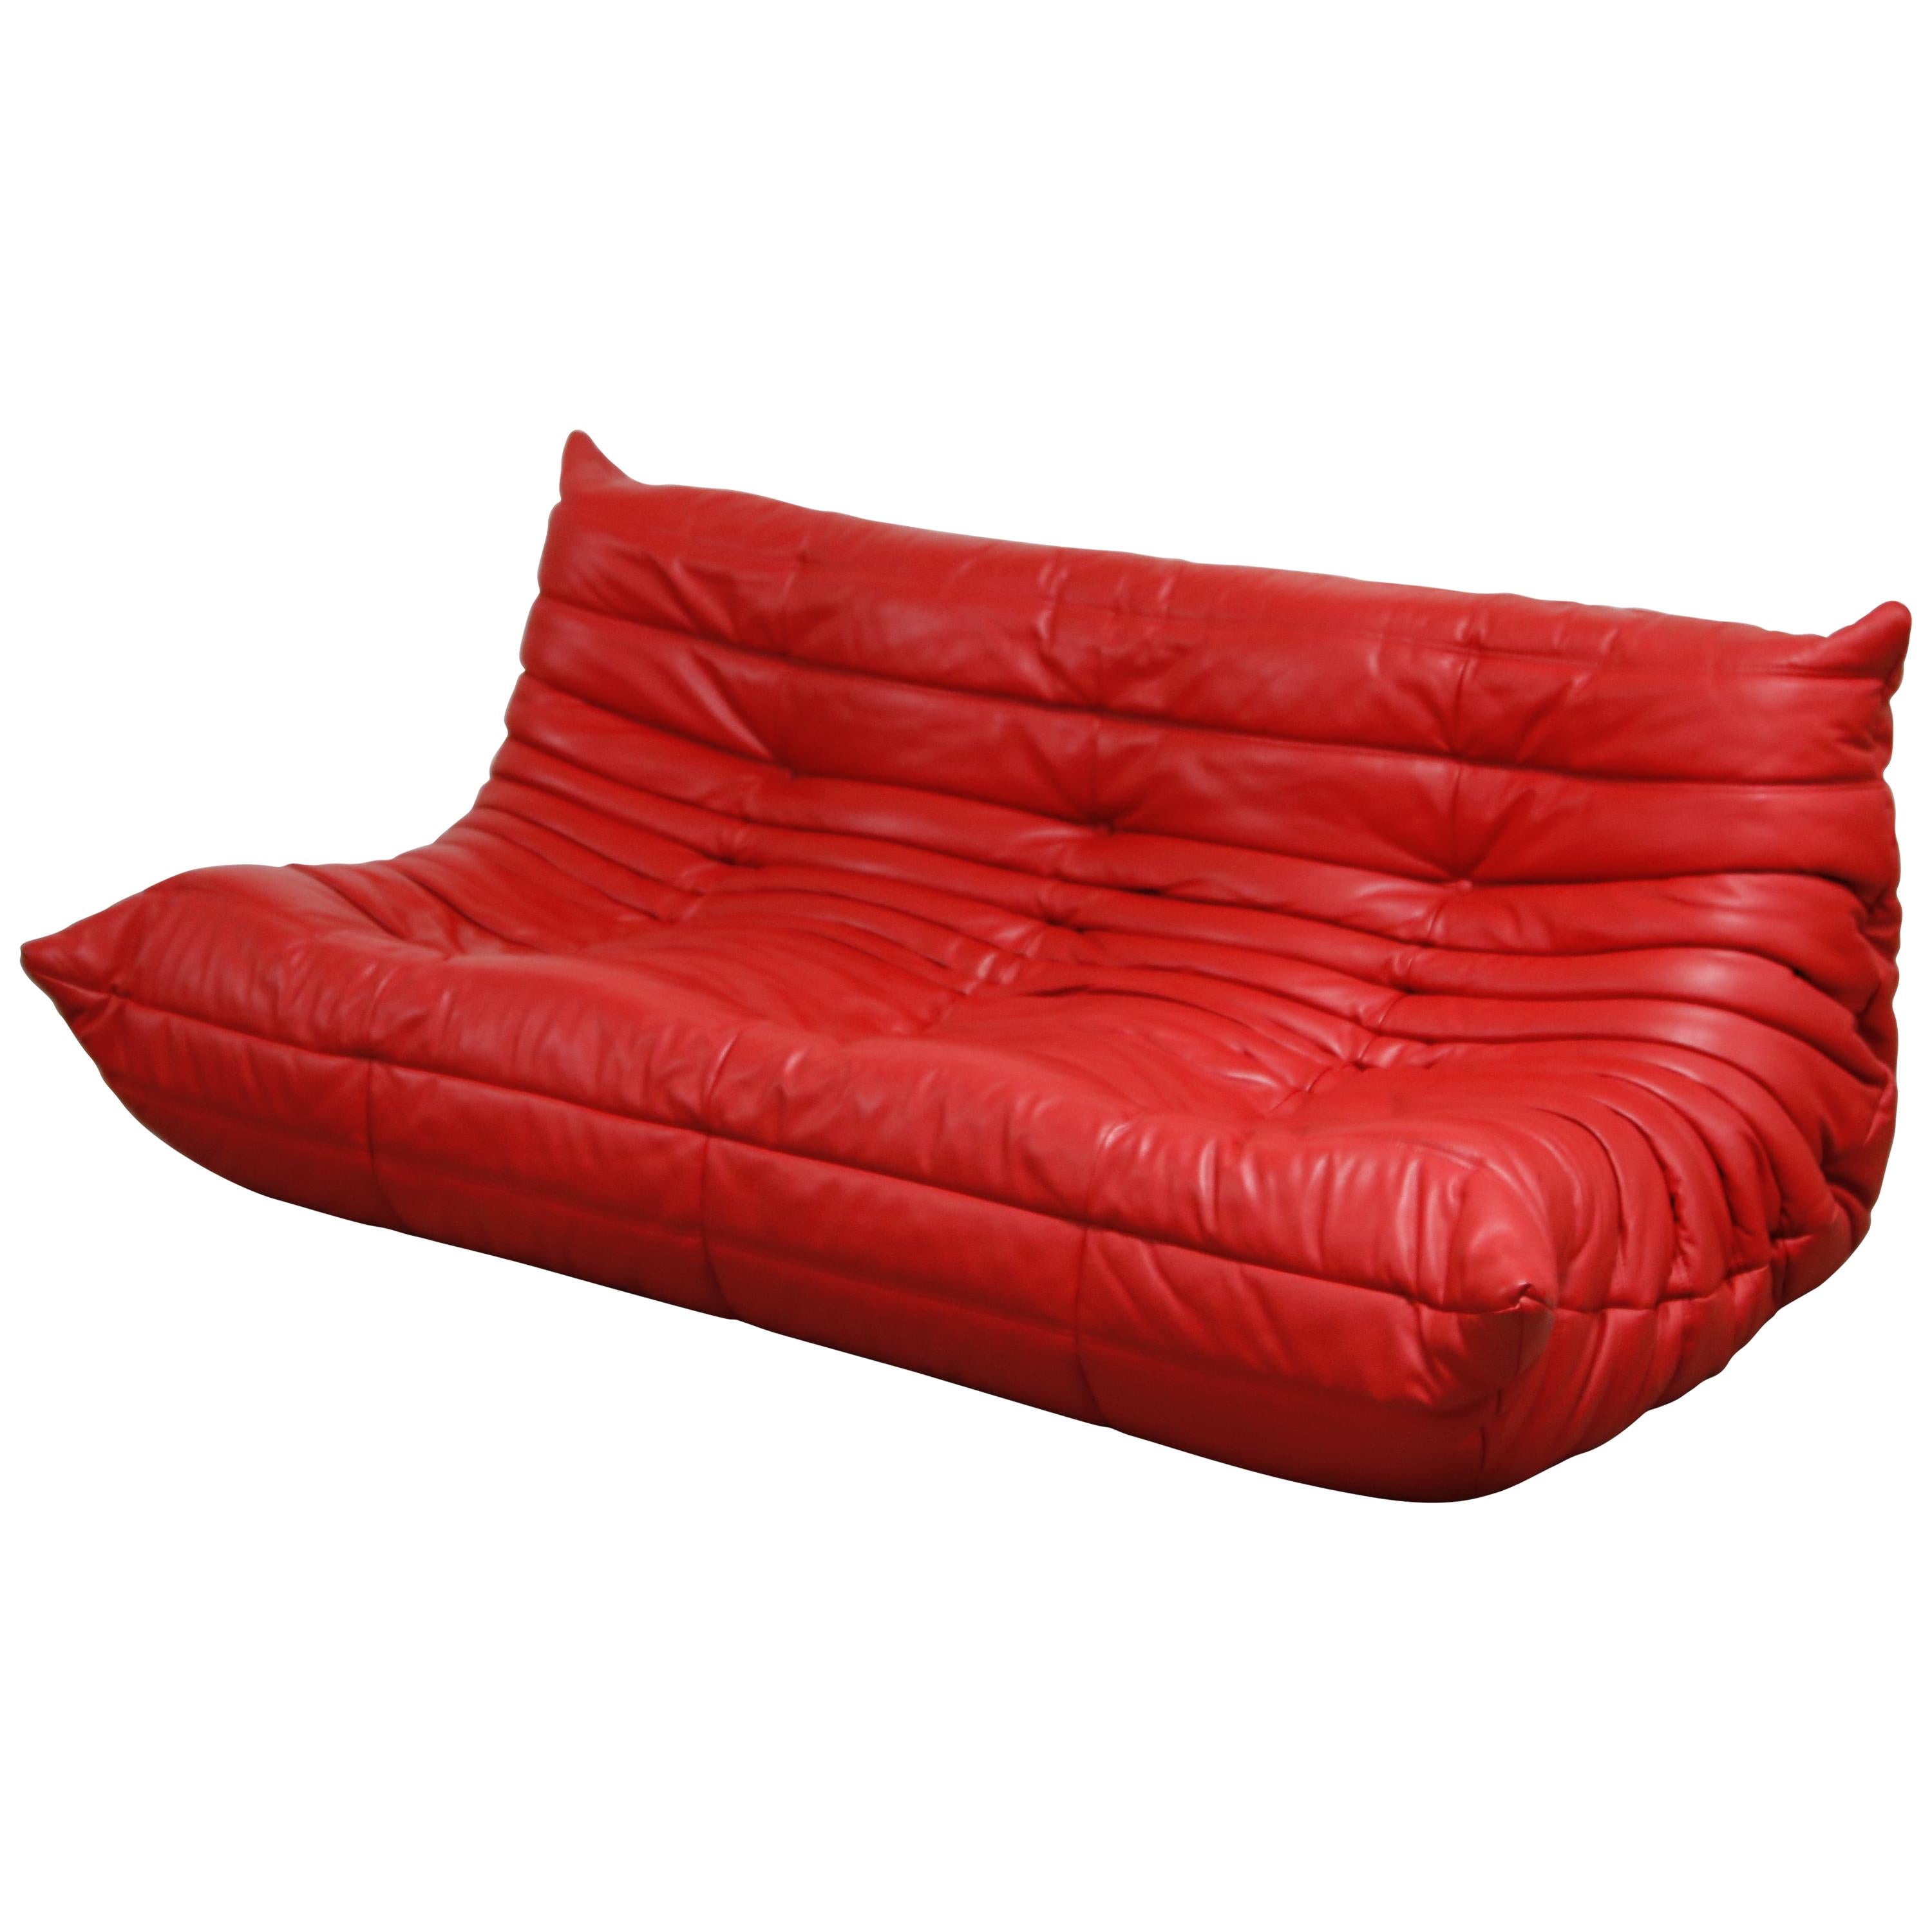 Lipstick Red Leather Togo Sofa by Michel Ducaroy for Ligne Roset, Signed, 1980s